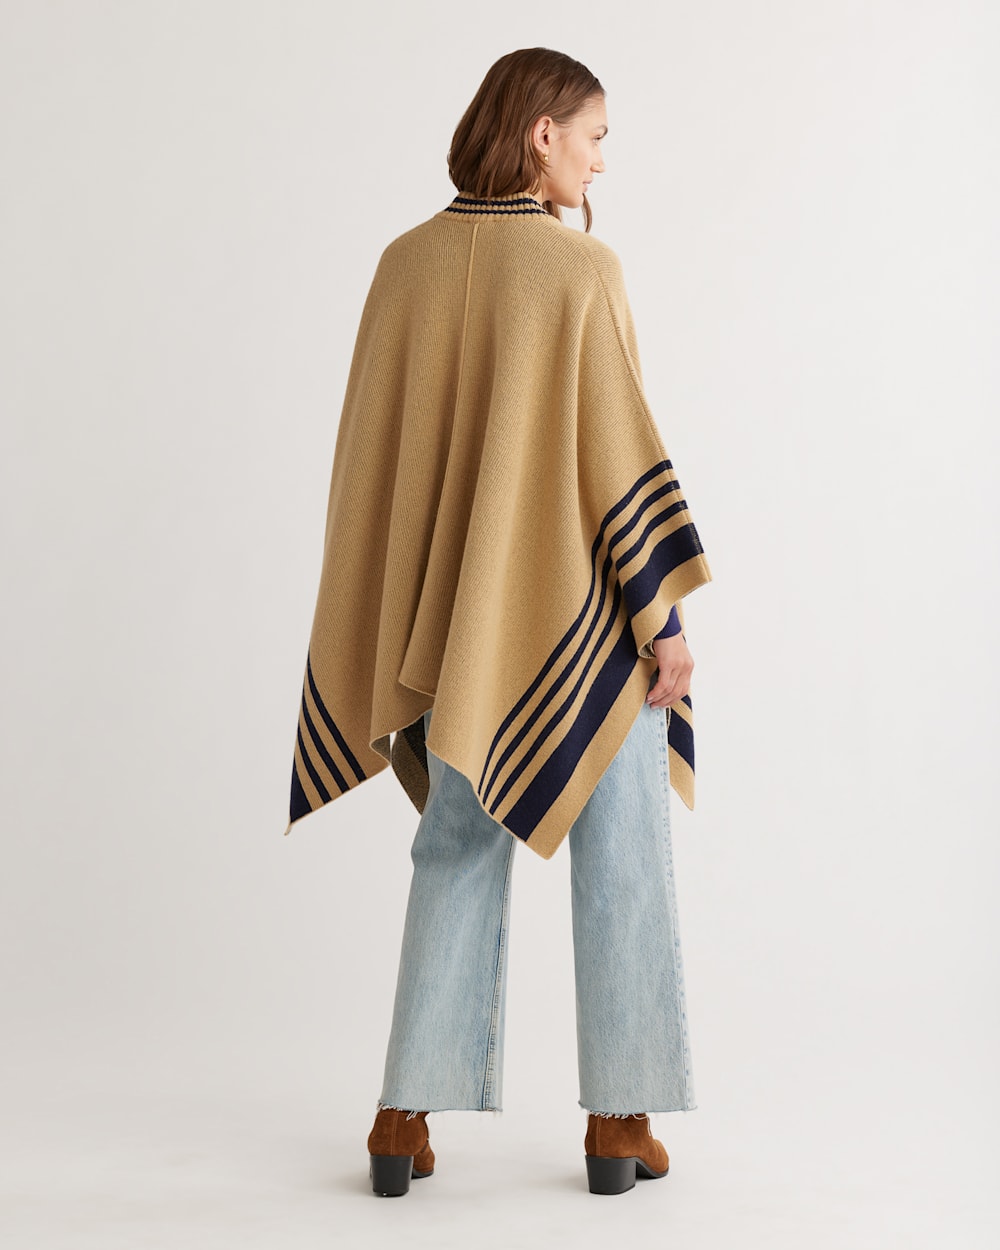 ALTERNATE VIEW OF WOMEN'S LAMBSWOOL KNIT BLANKET CAPE IN CAMEL/NAVY image number 3